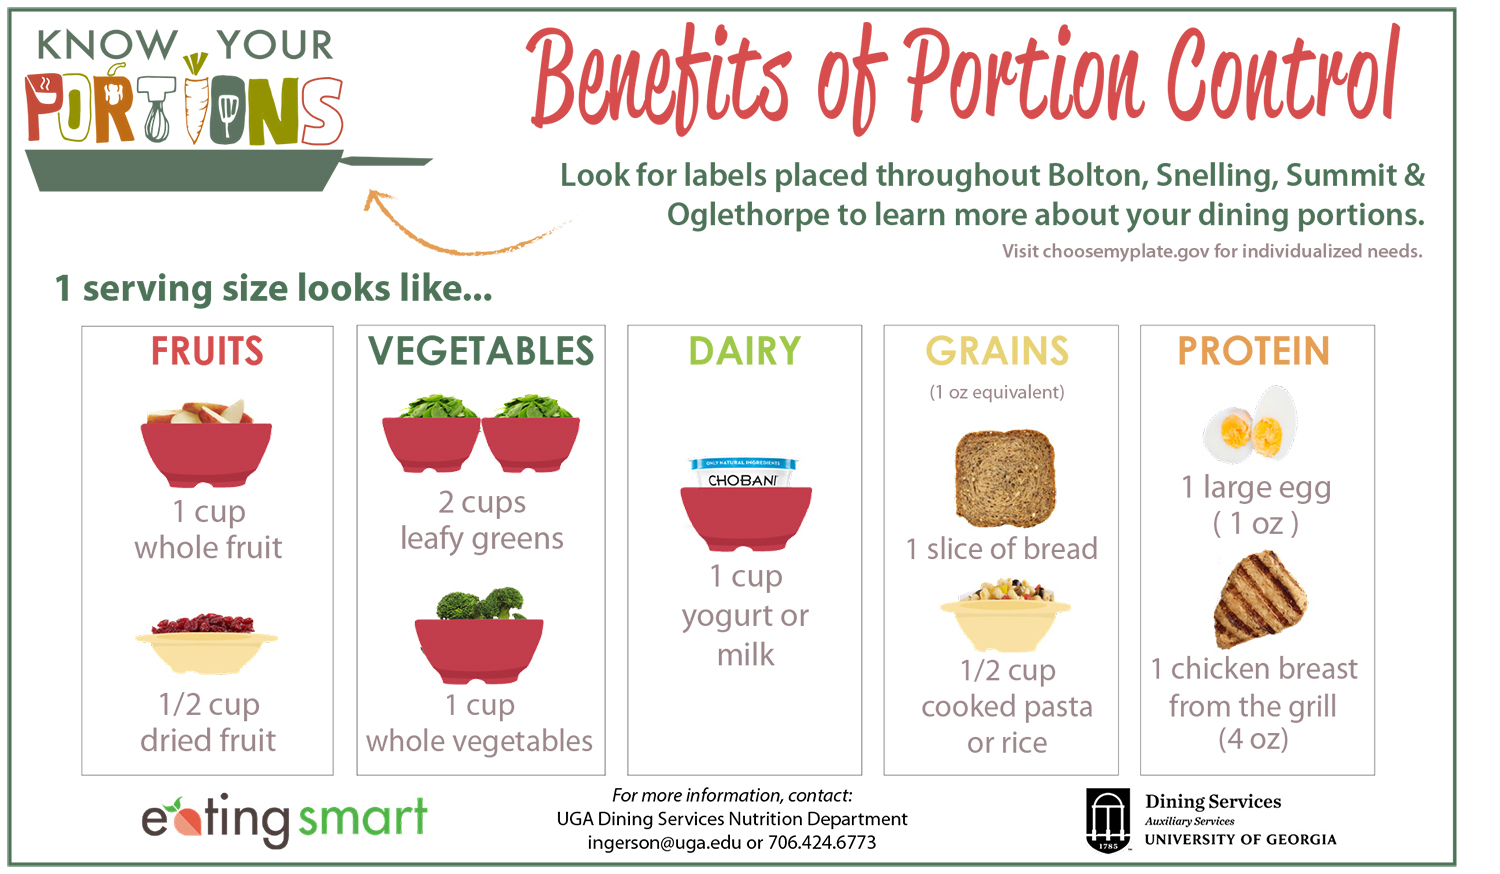 Image illustrating portions of fruit, vegetables, dairy, grains, and protein.